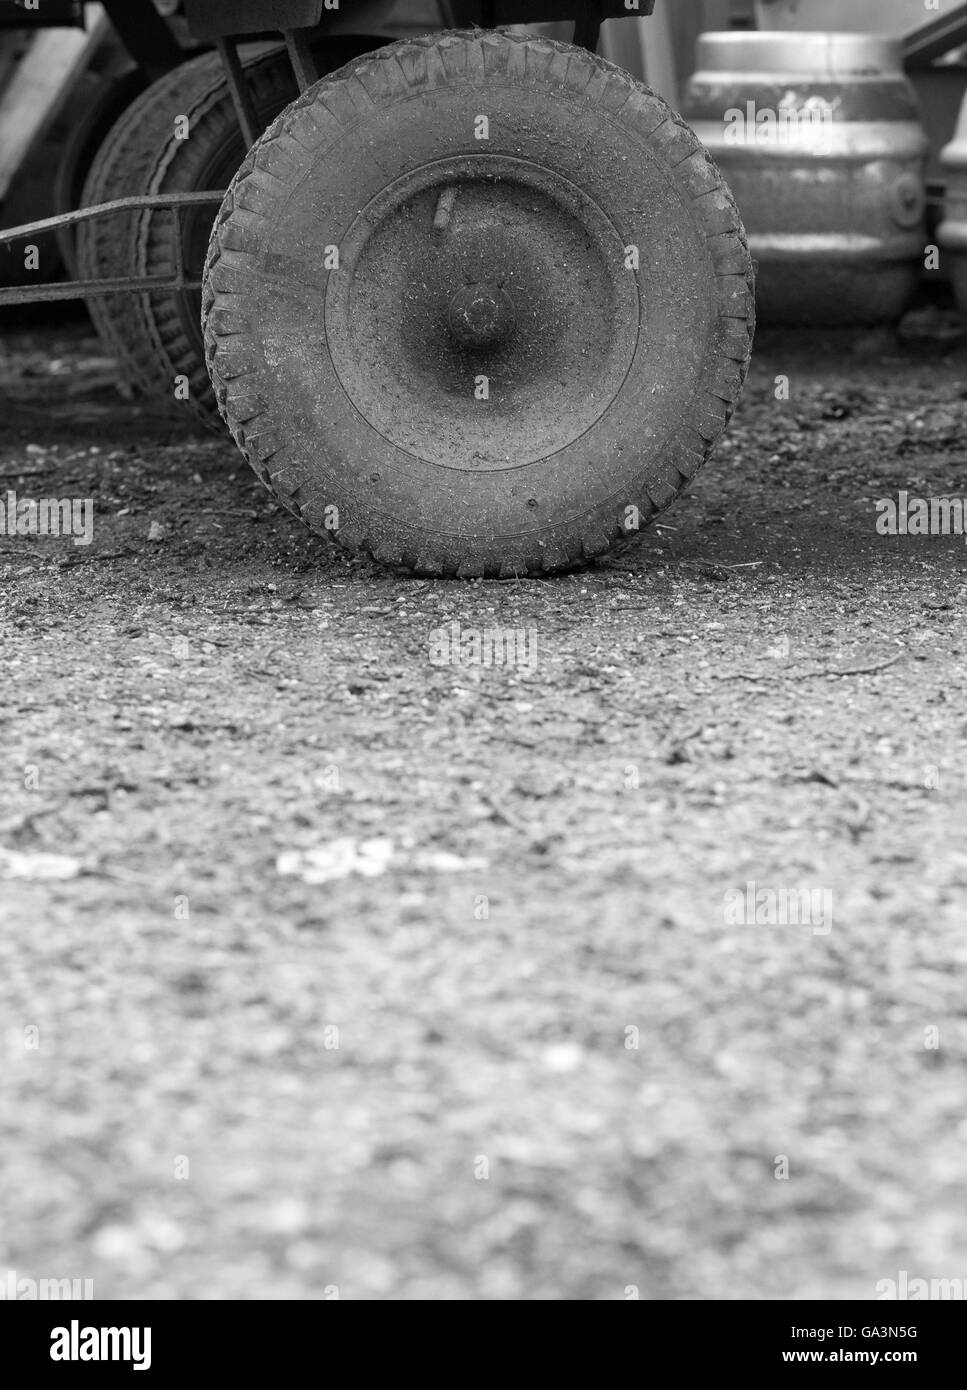 Old dirty pneumatic wheel of small cart in courtyard Stock Photo